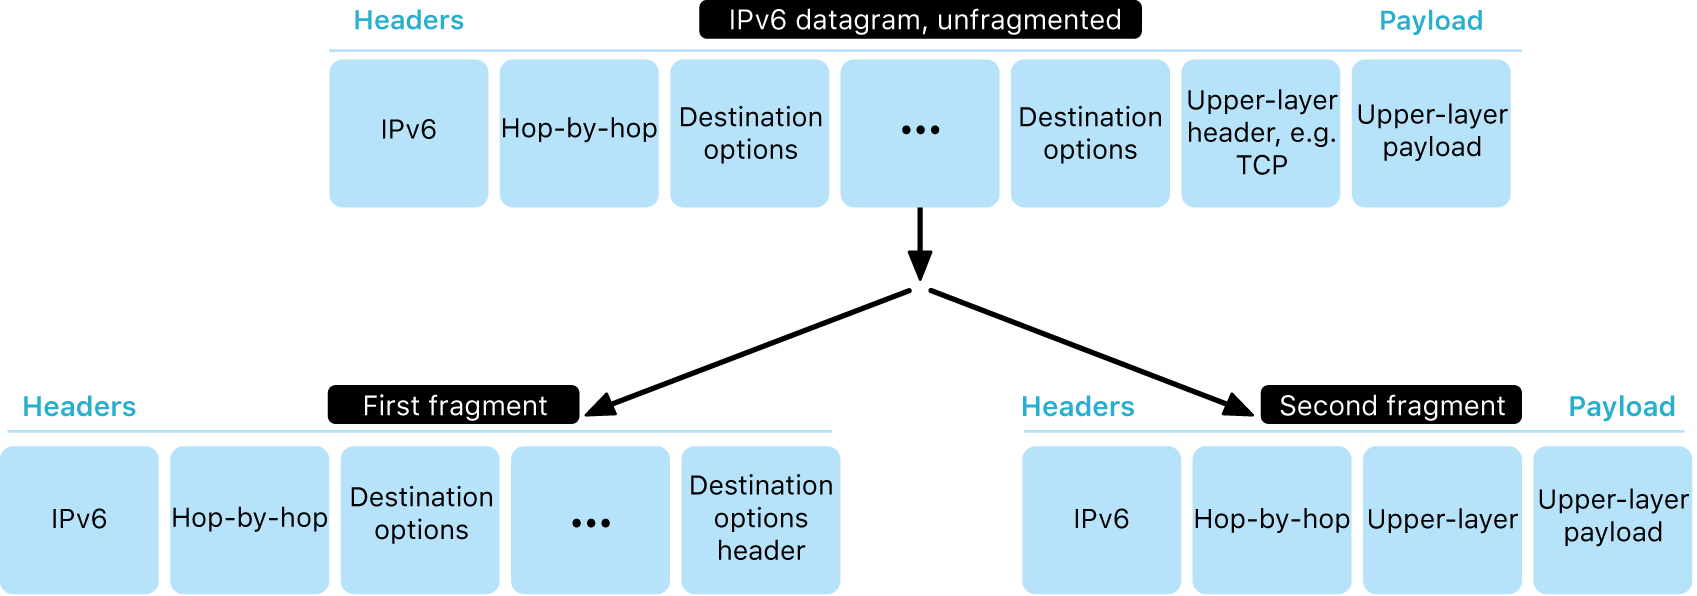 A diagram showing an IPv6 datagram in two layers: unfragmented and, below it, fragmented.